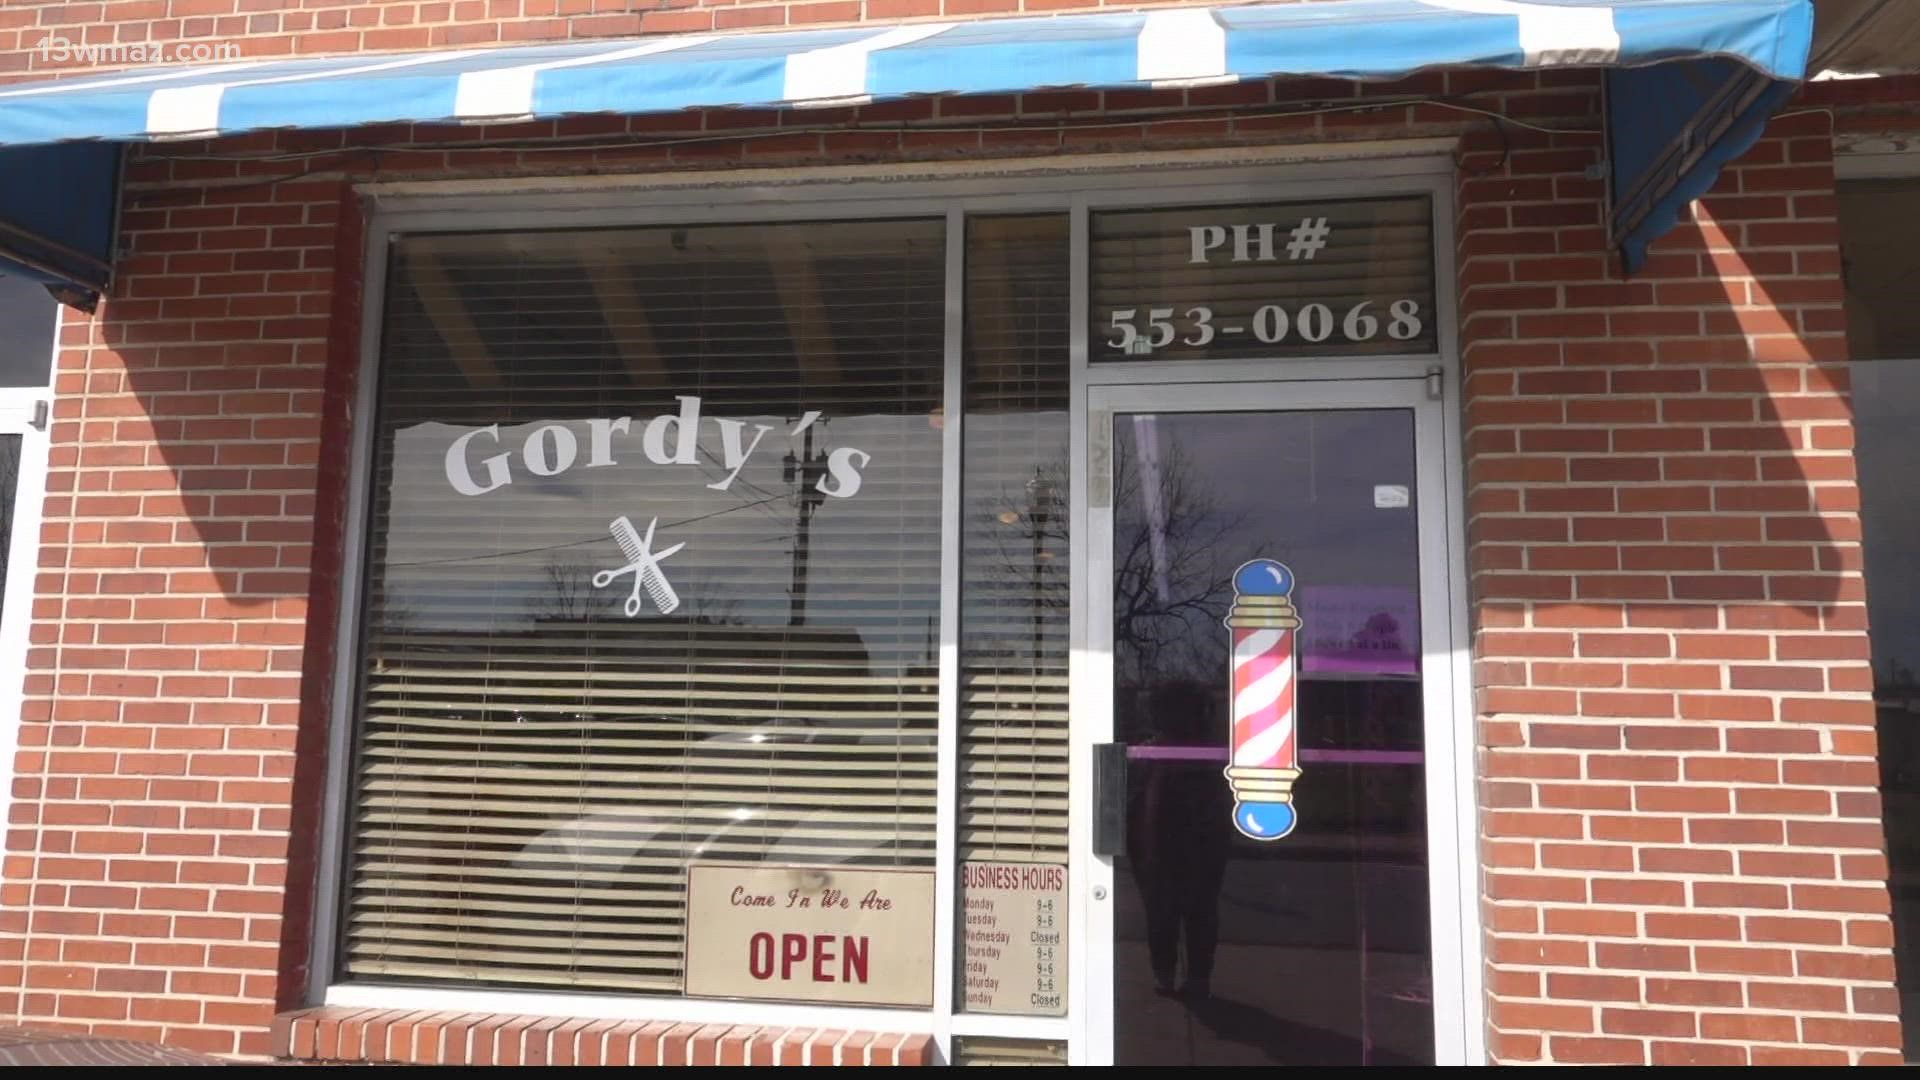 Gordy’s Barber Shop was founded in 1951. This shop is located in the historic Lucas Smith Building on Gilmore Street which was once home to many Black businesses.